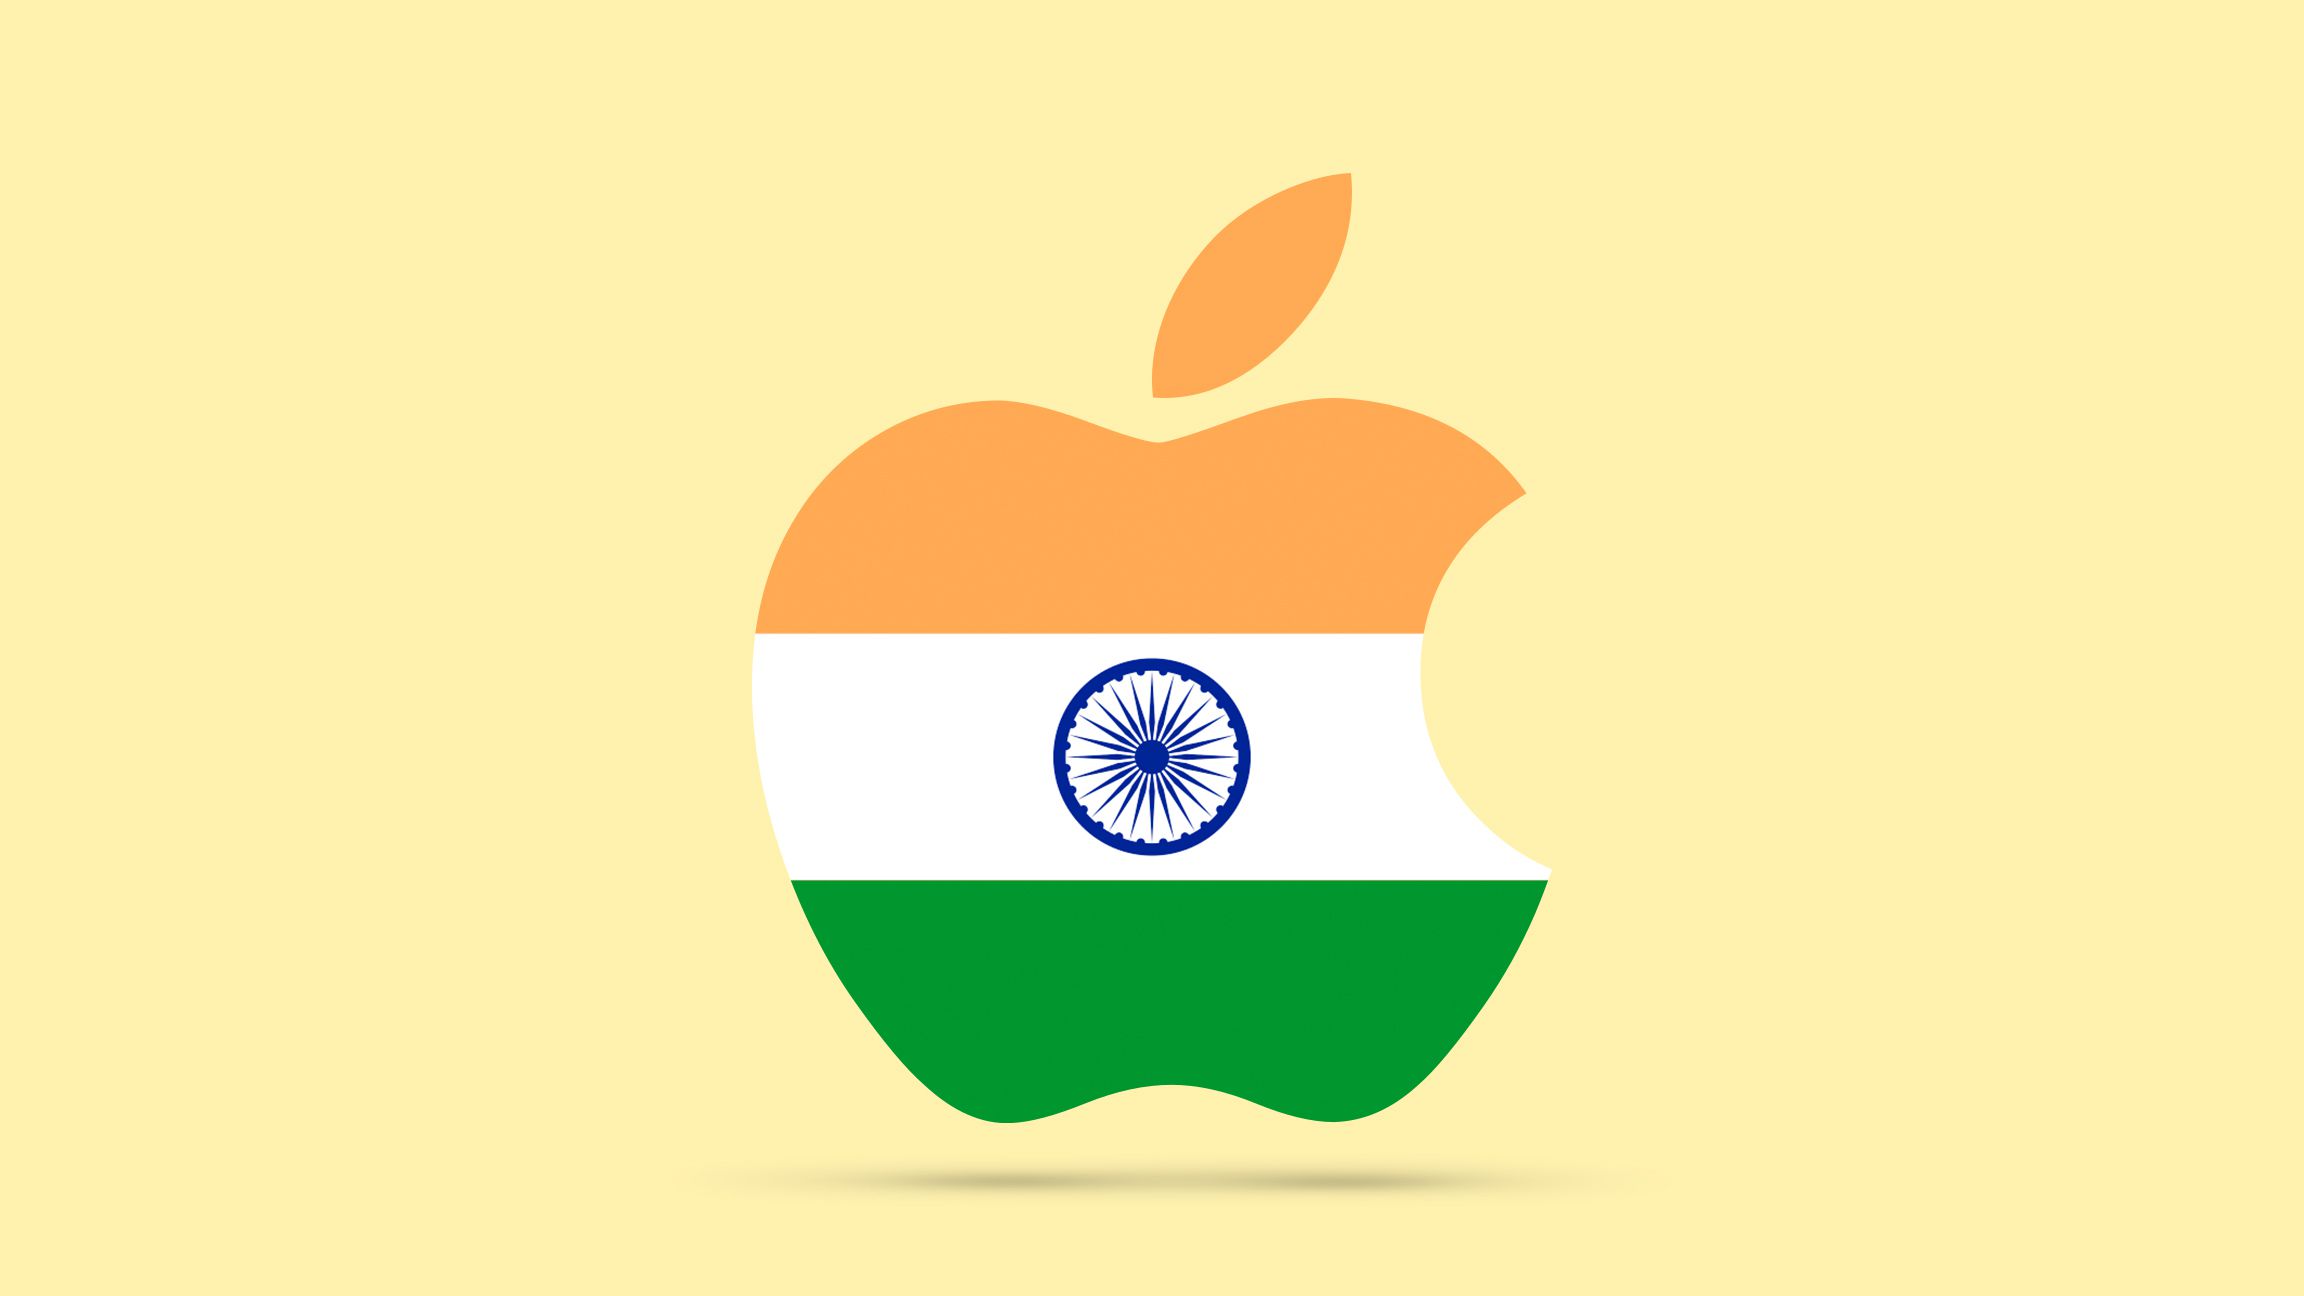 Apple Hires Staff Ahead of First Retail Stores Opening in India